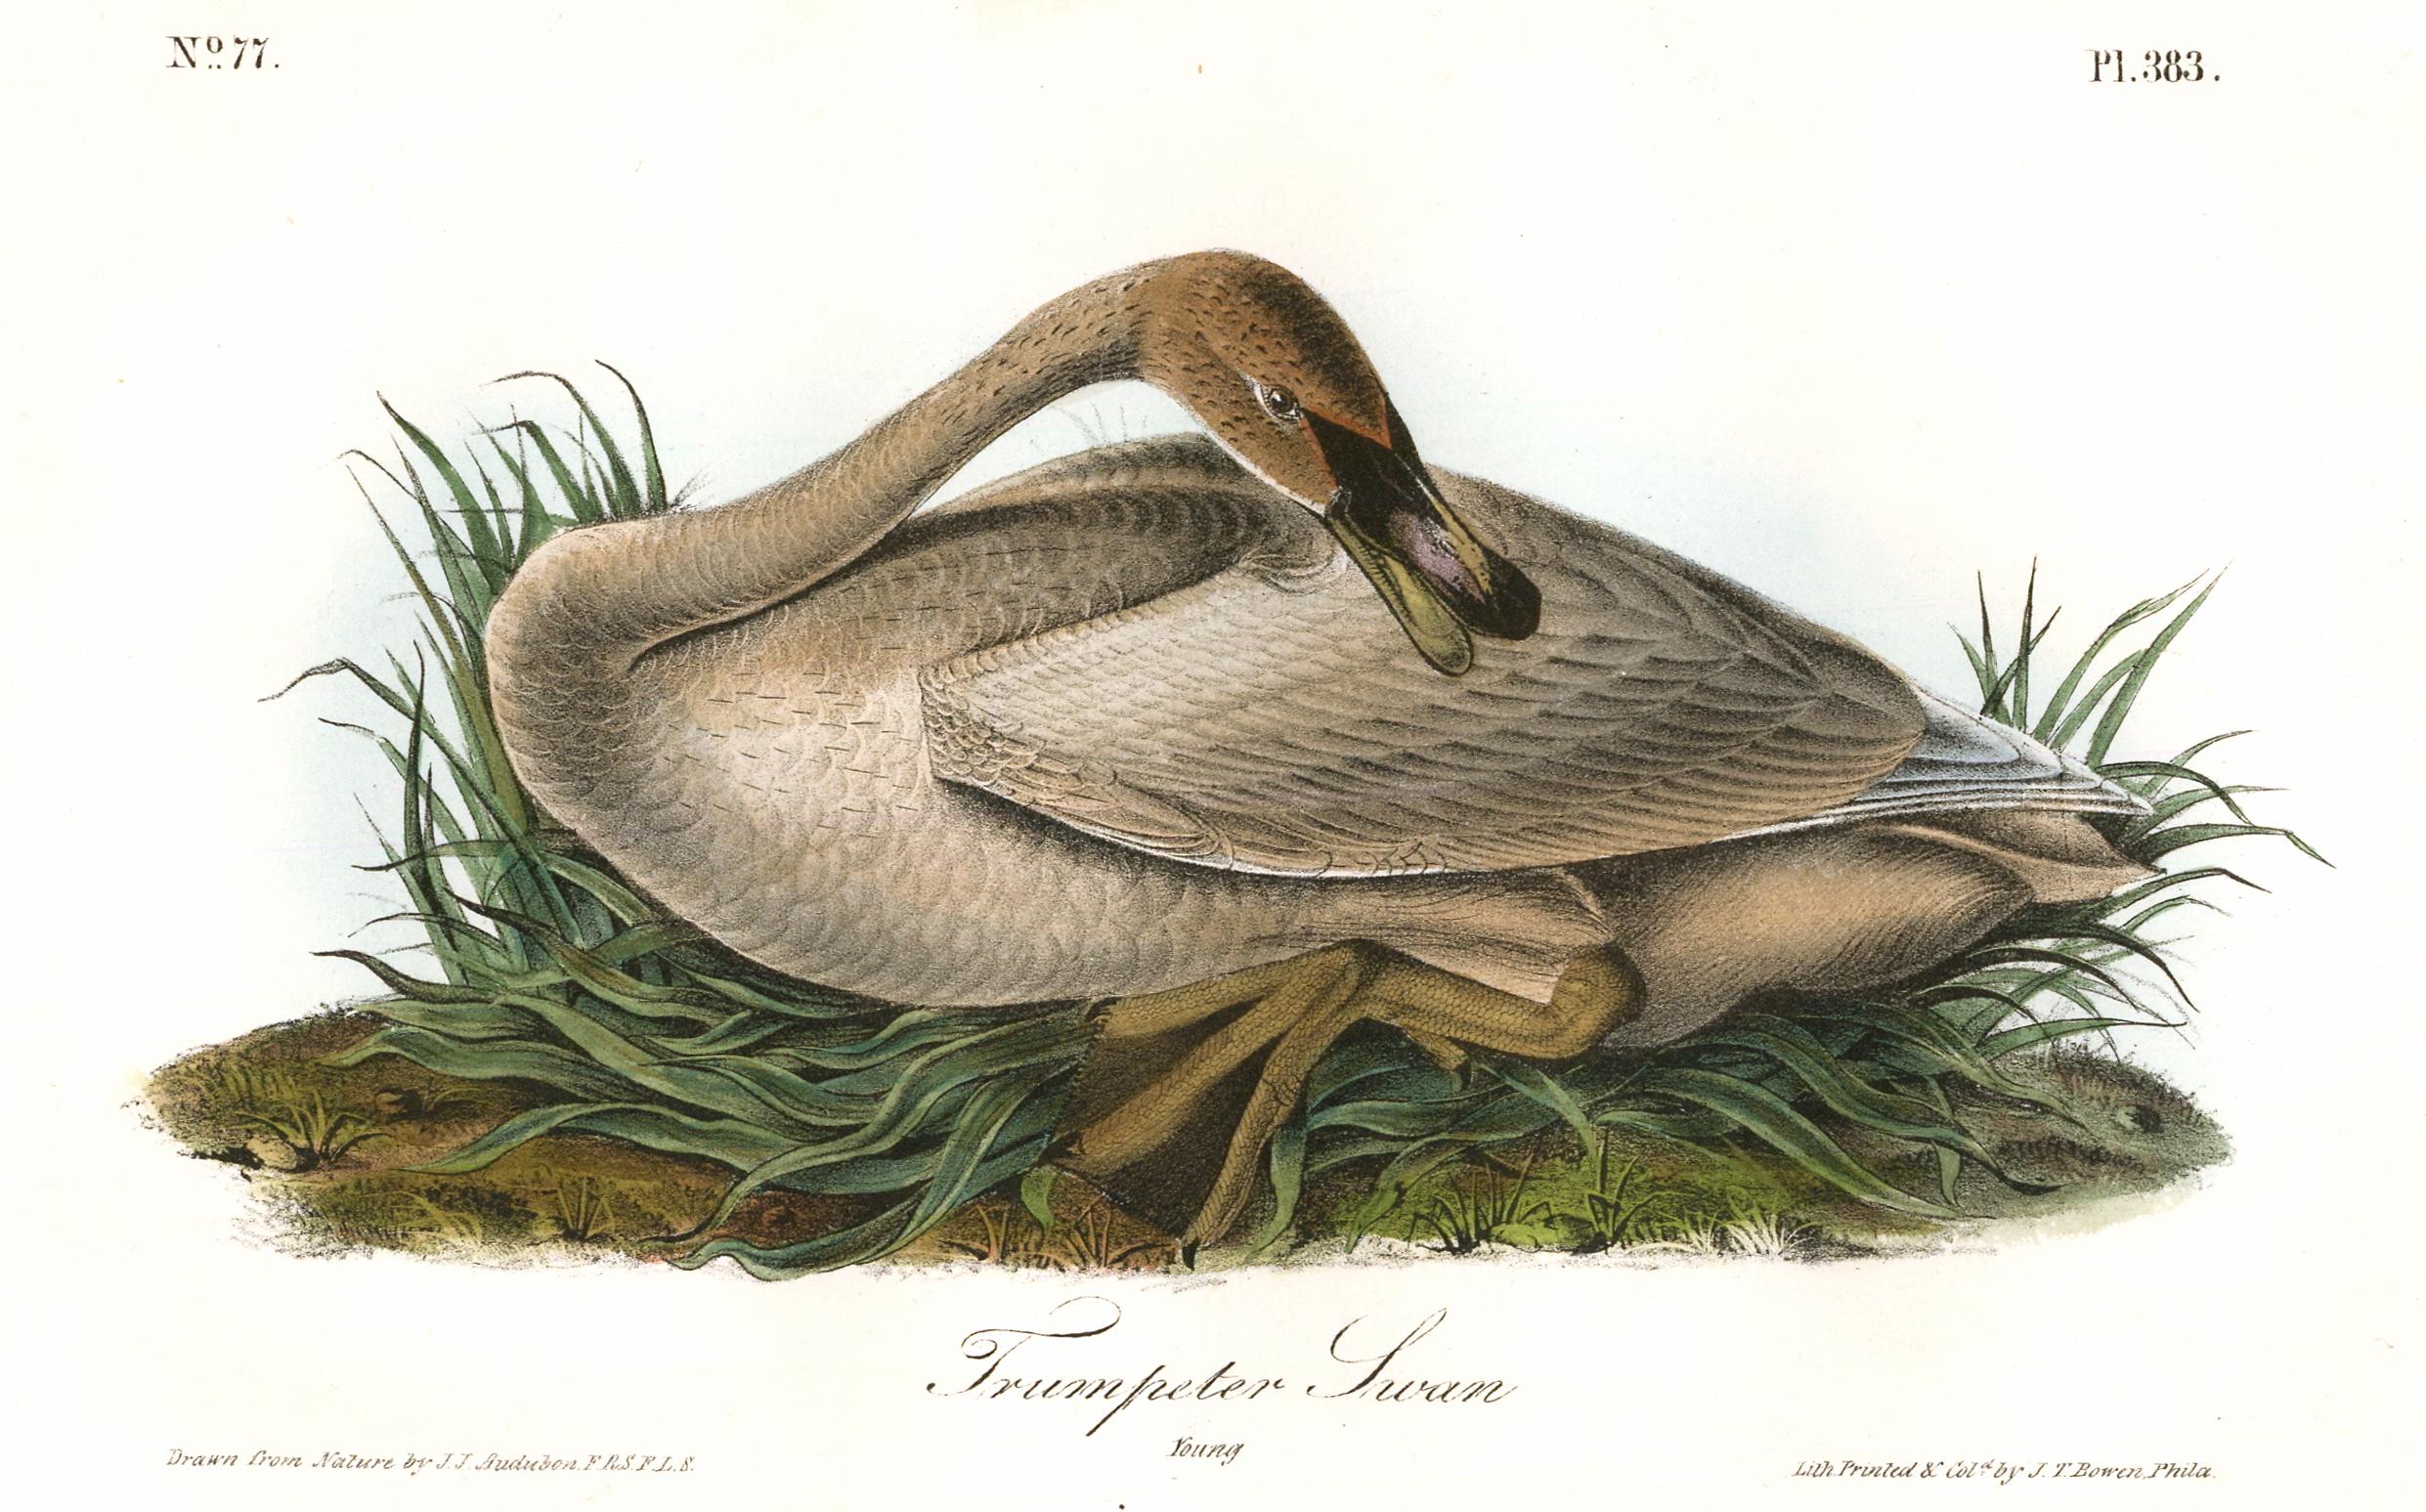 How can I tell if my Audubon print is real?